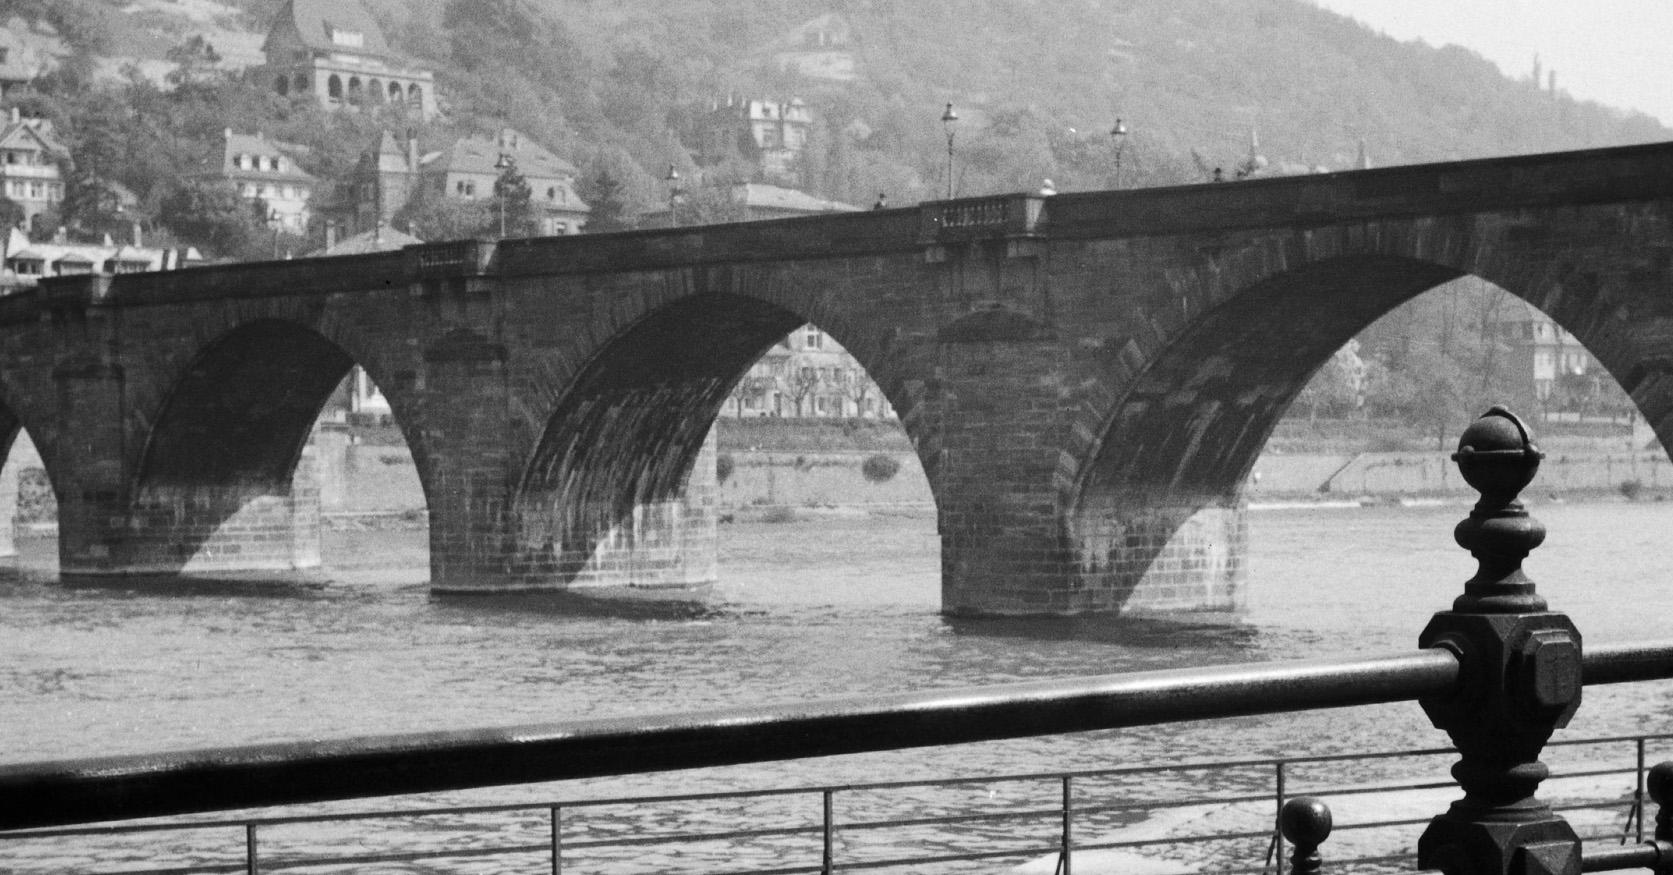 View to old bridge over river Neckar at Heidelberg, Germany 1936, Printed Later  - Photograph by Karl Heinrich Lämmel